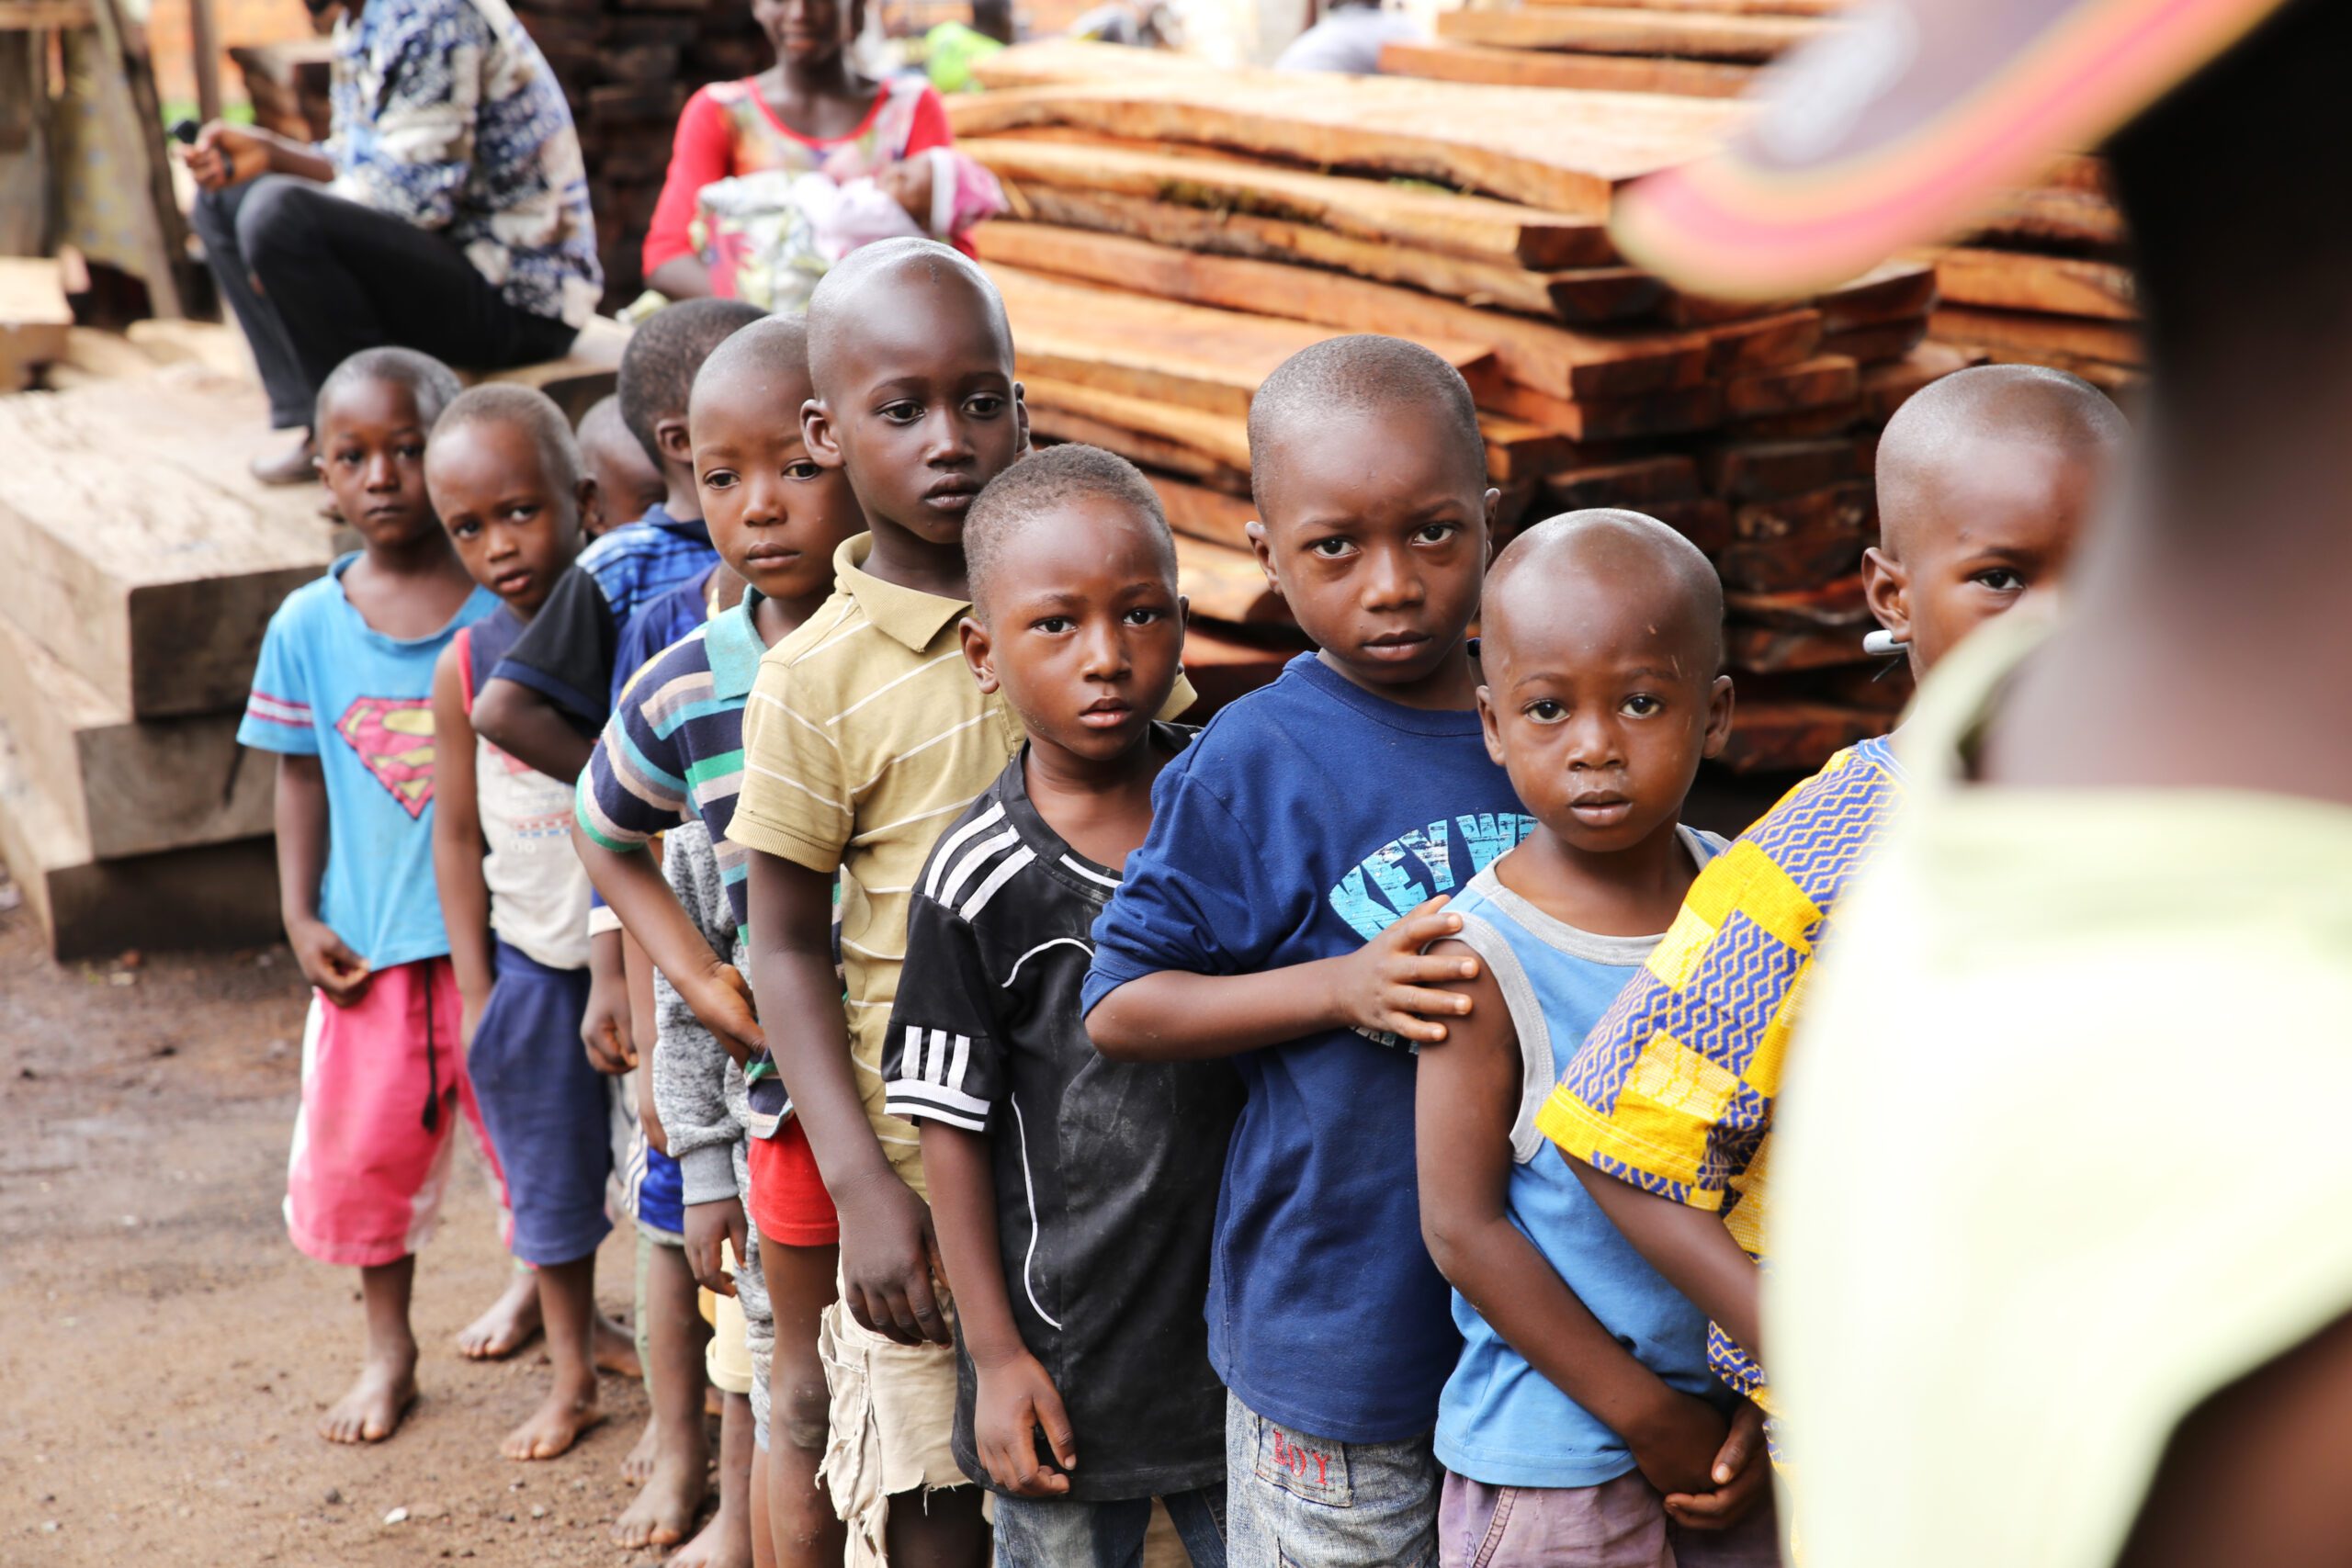 Children line up to receive vitamin A supplementation in Guinea.